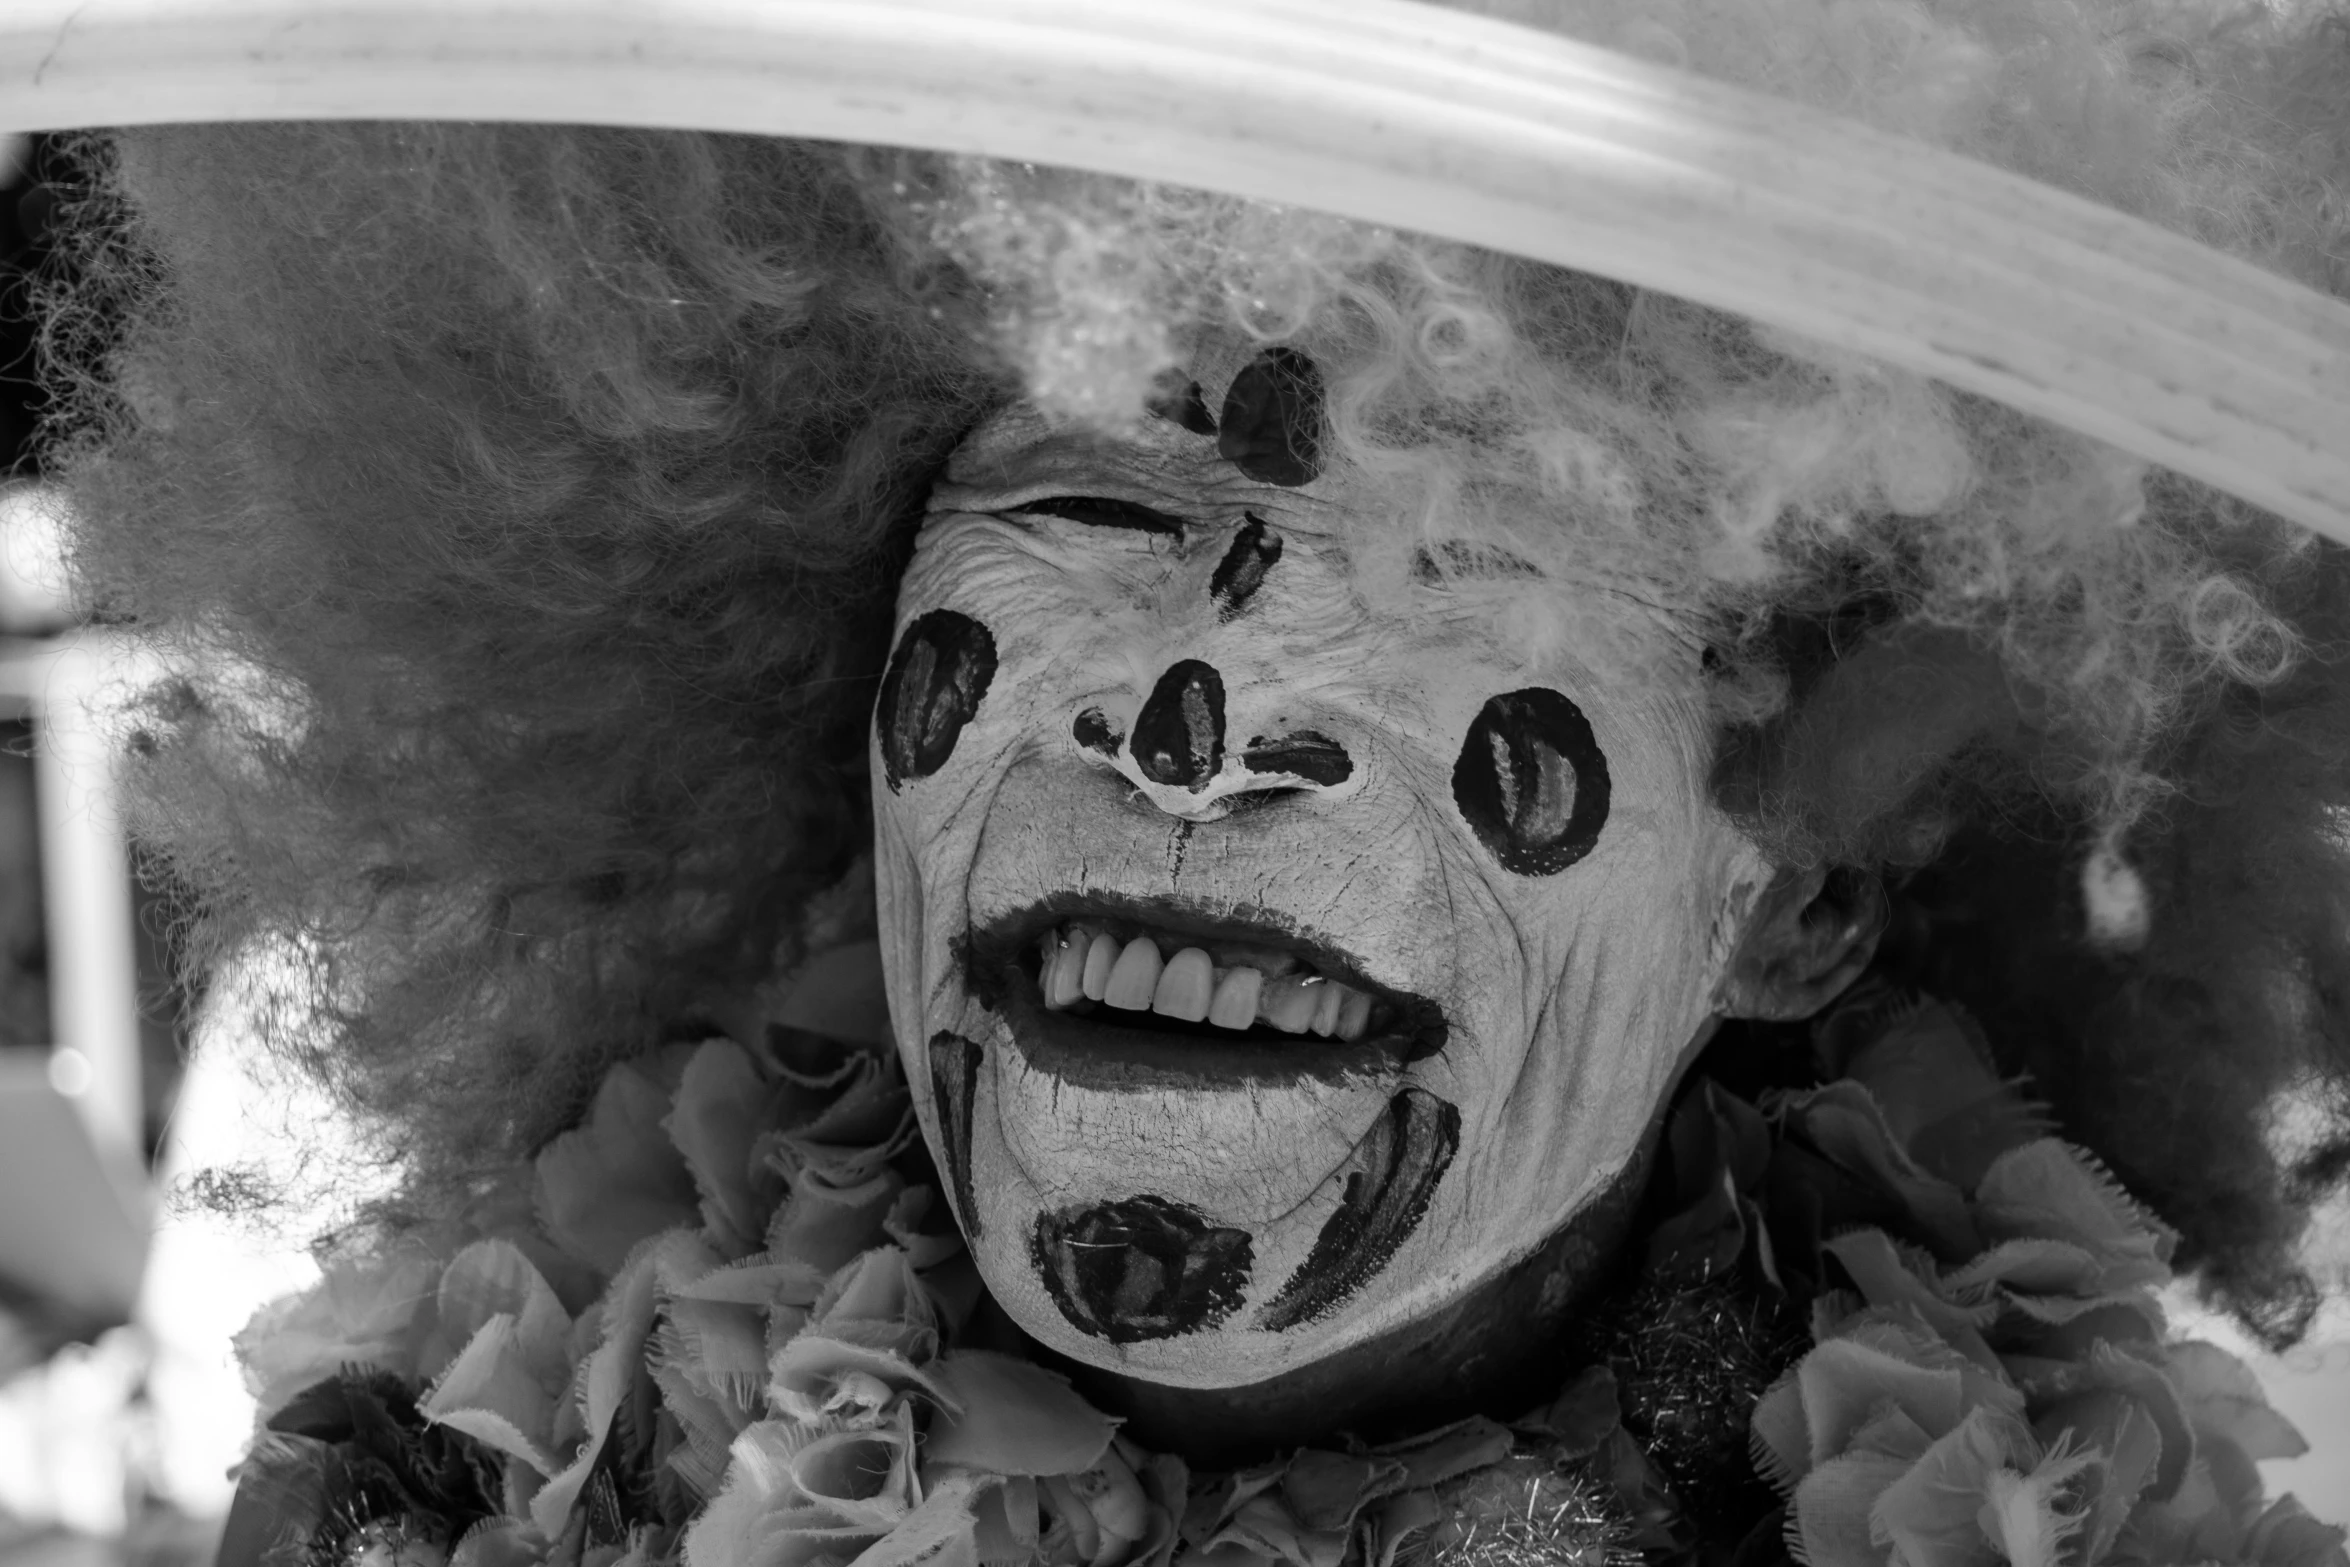 a black and white photo of a clown, by Jan Rustem, carnaval de barranquilla, highly detailed photo of happy, circle pit demons, jordan peele's face